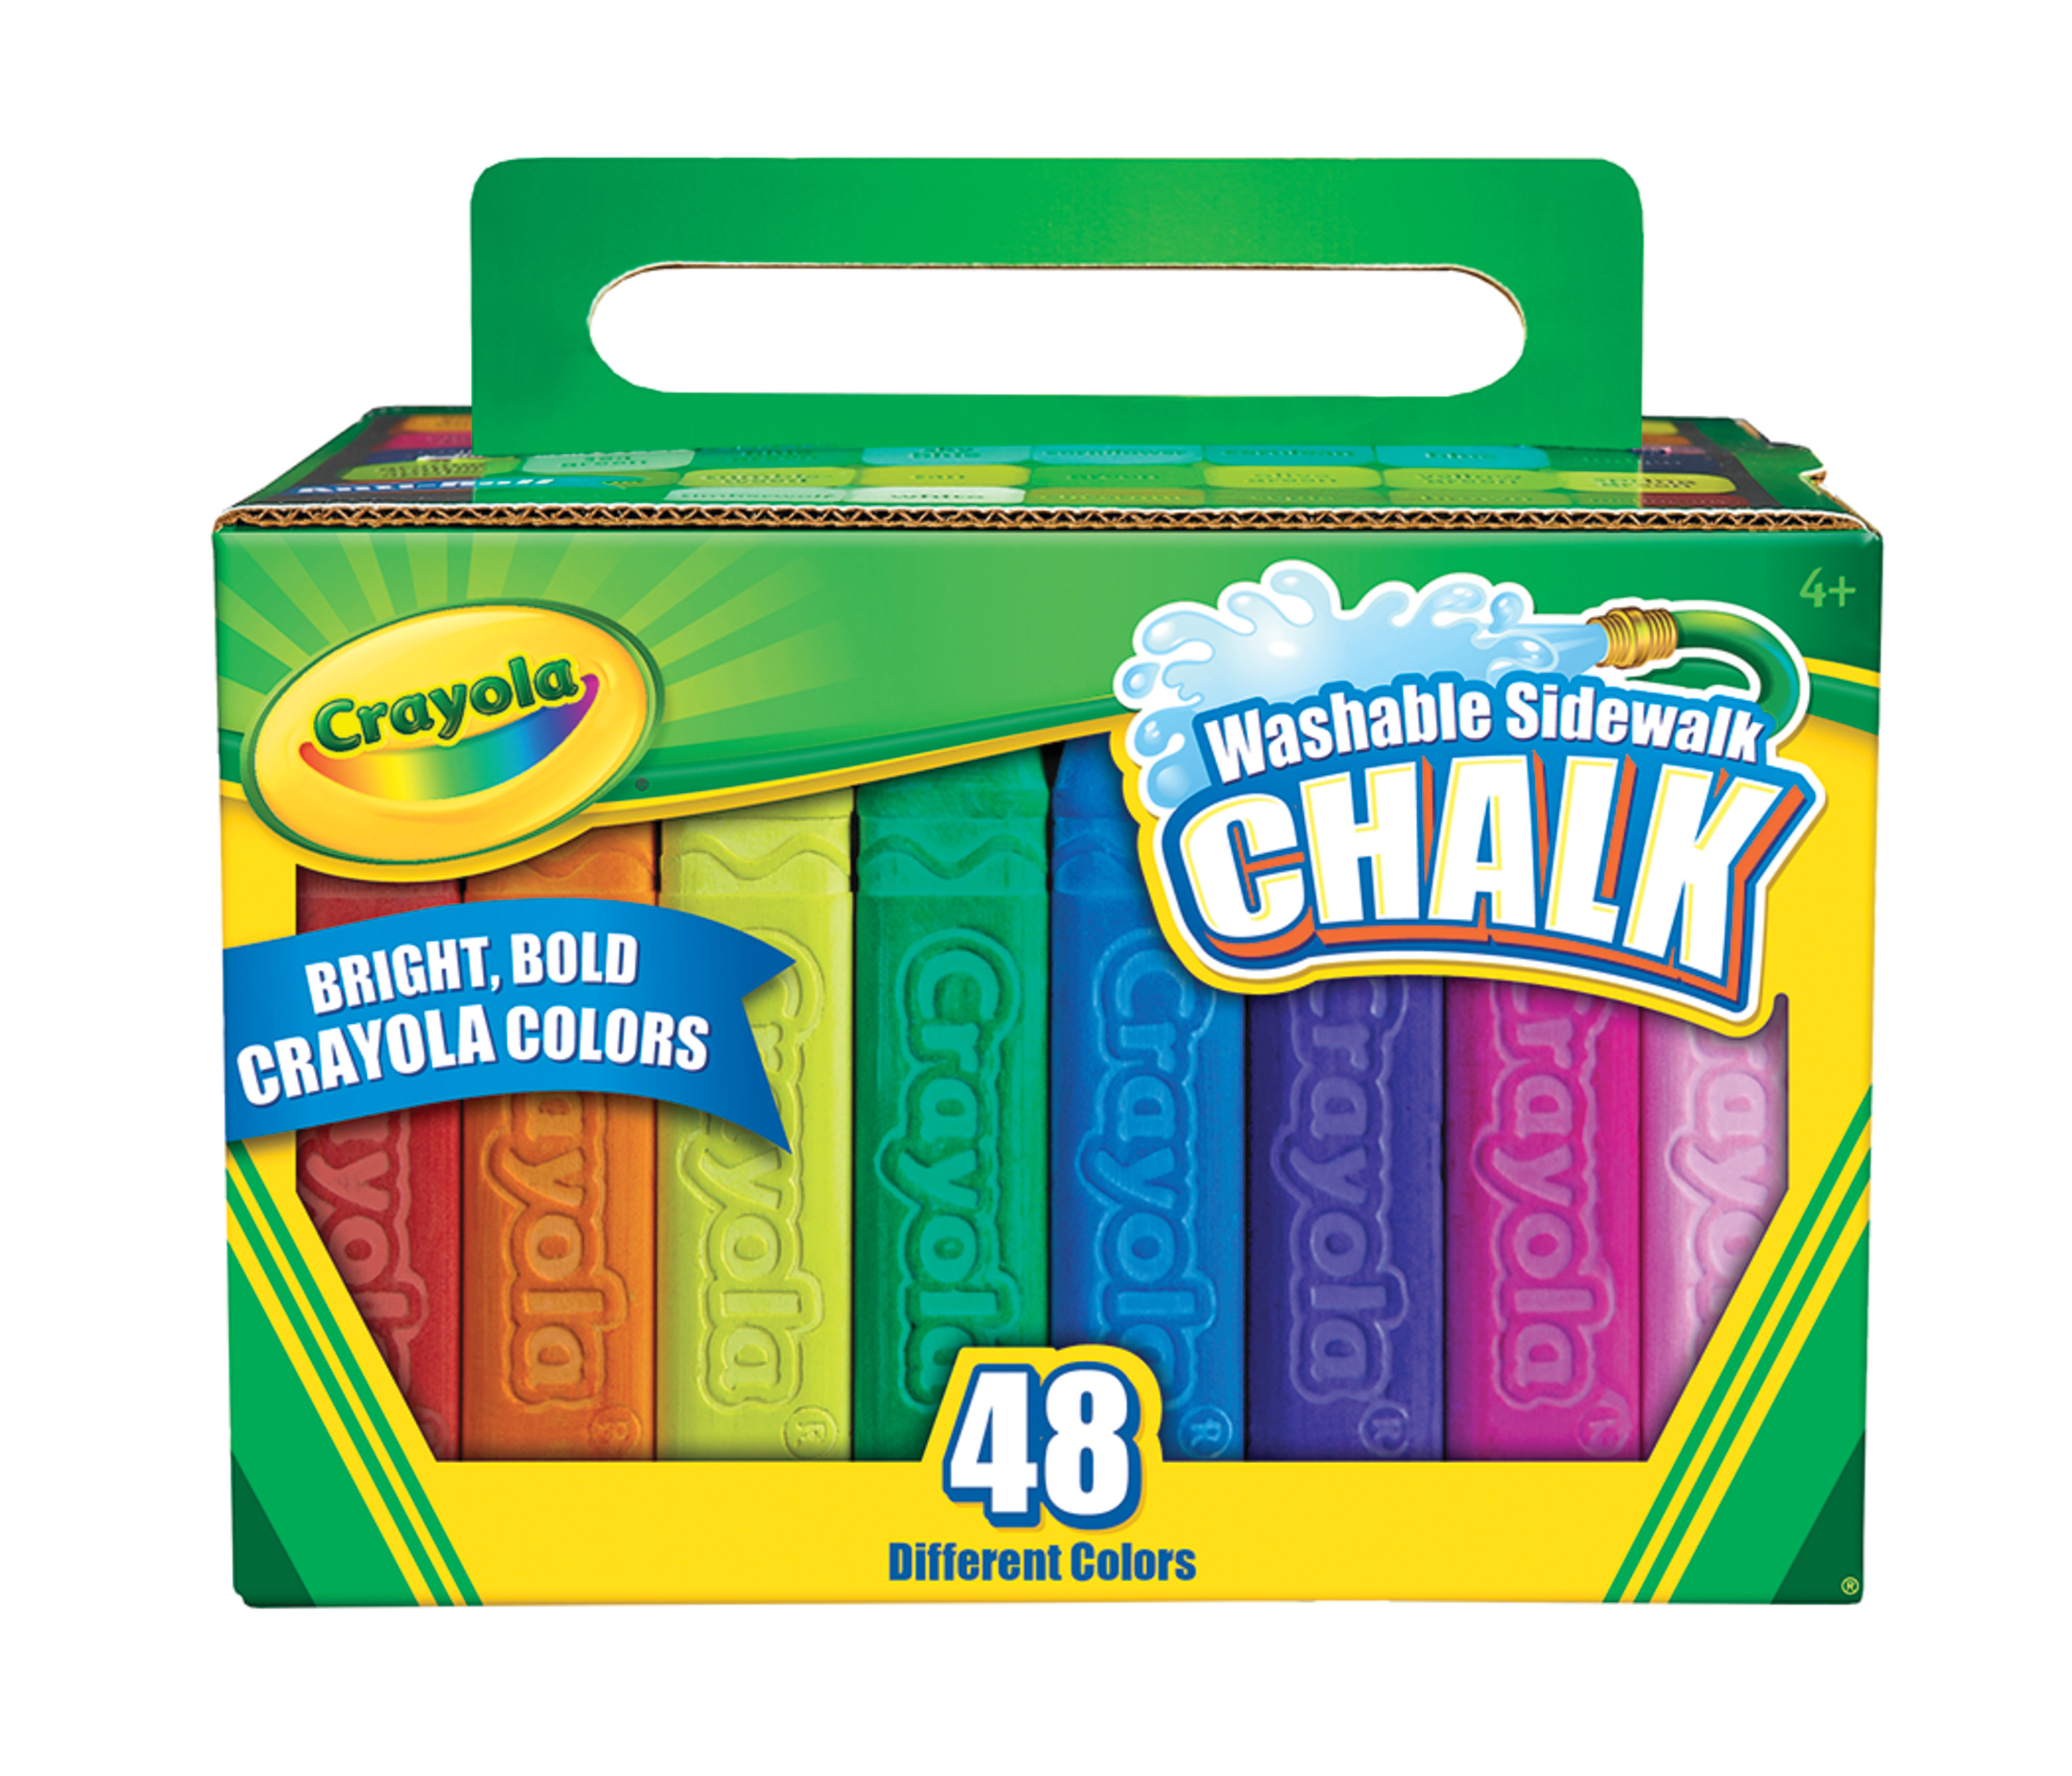 Crayola Washable Sidewalk Chalk in Assorted Colors, 48 Count - image 1 of 9